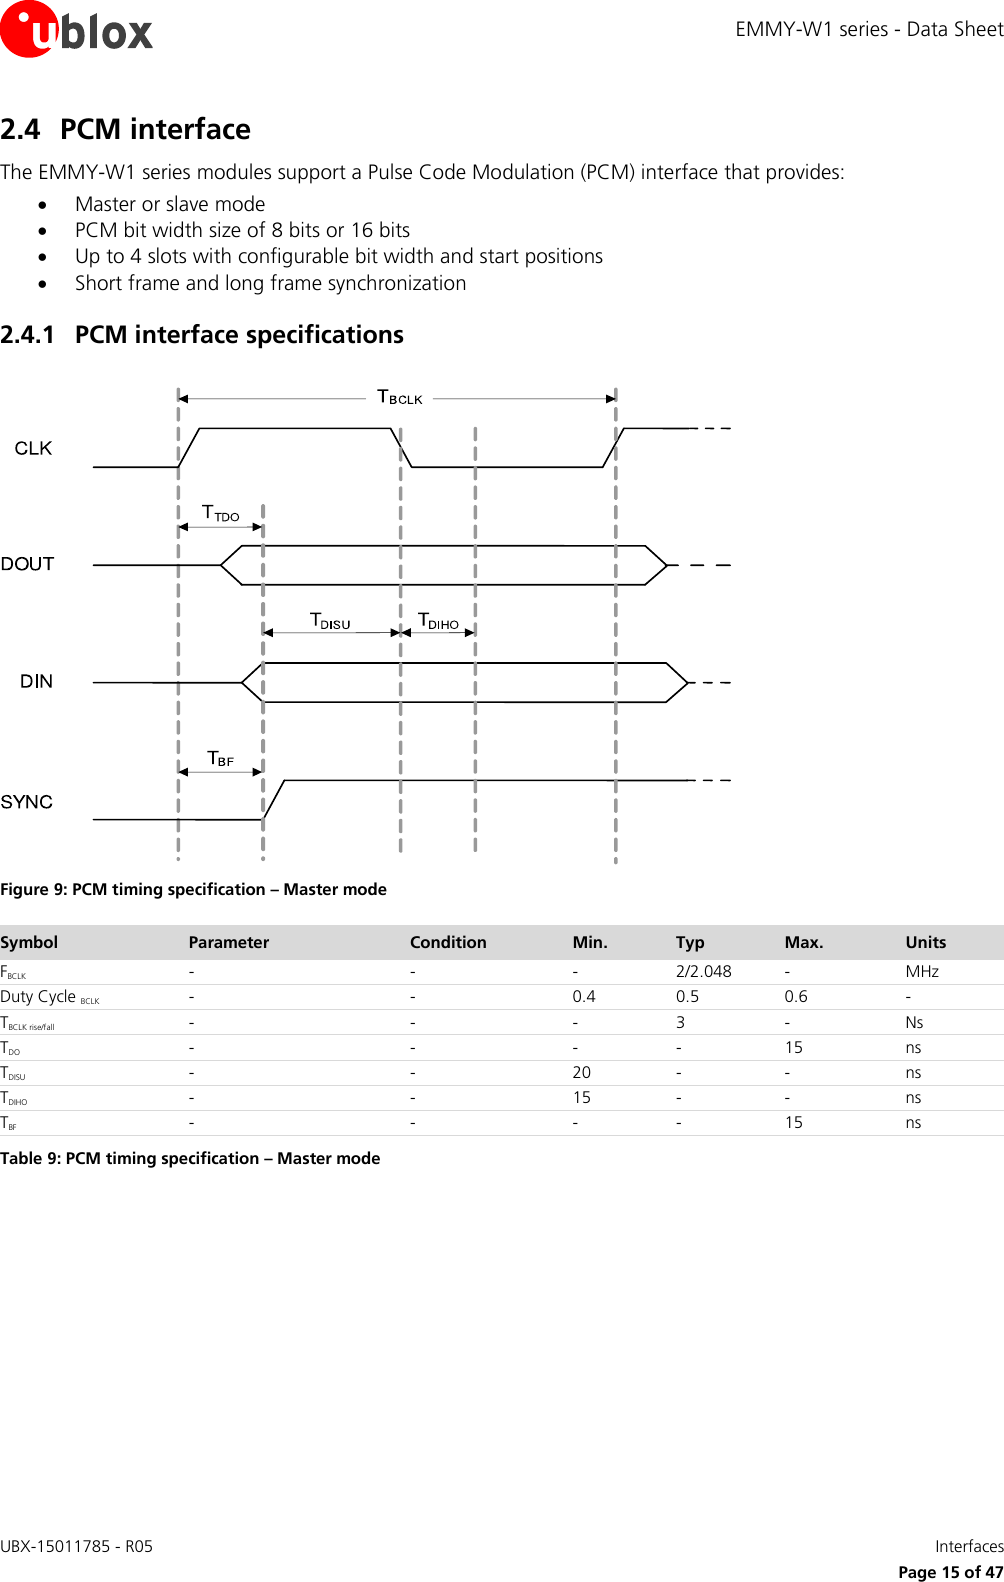 EMMY-W1 series - Data Sheet UBX-15011785 - R05   Interfaces     Page 15 of 47 2.4 PCM interface The EMMY-W1 series modules support a Pulse Code Modulation (PCM) interface that provides:  Master or slave mode  PCM bit width size of 8 bits or 16 bits  Up to 4 slots with configurable bit width and start positions  Short frame and long frame synchronization 2.4.1 PCM interface specifications   Figure 9: PCM timing specification – Master mode  Symbol Parameter Condition Min.        Typ Max. Units FBCLK - - - 2/2.048 - MHz Duty Cycle BCLK - - 0.4 0.5 0.6 - TBCLK rise/fall - - - 3 - Ns TDO - - - - 15 ns TDISU - - 20 - - ns TDIHO - - 15 - - ns TBF - - - - 15 ns Table 9: PCM timing specification – Master mode 